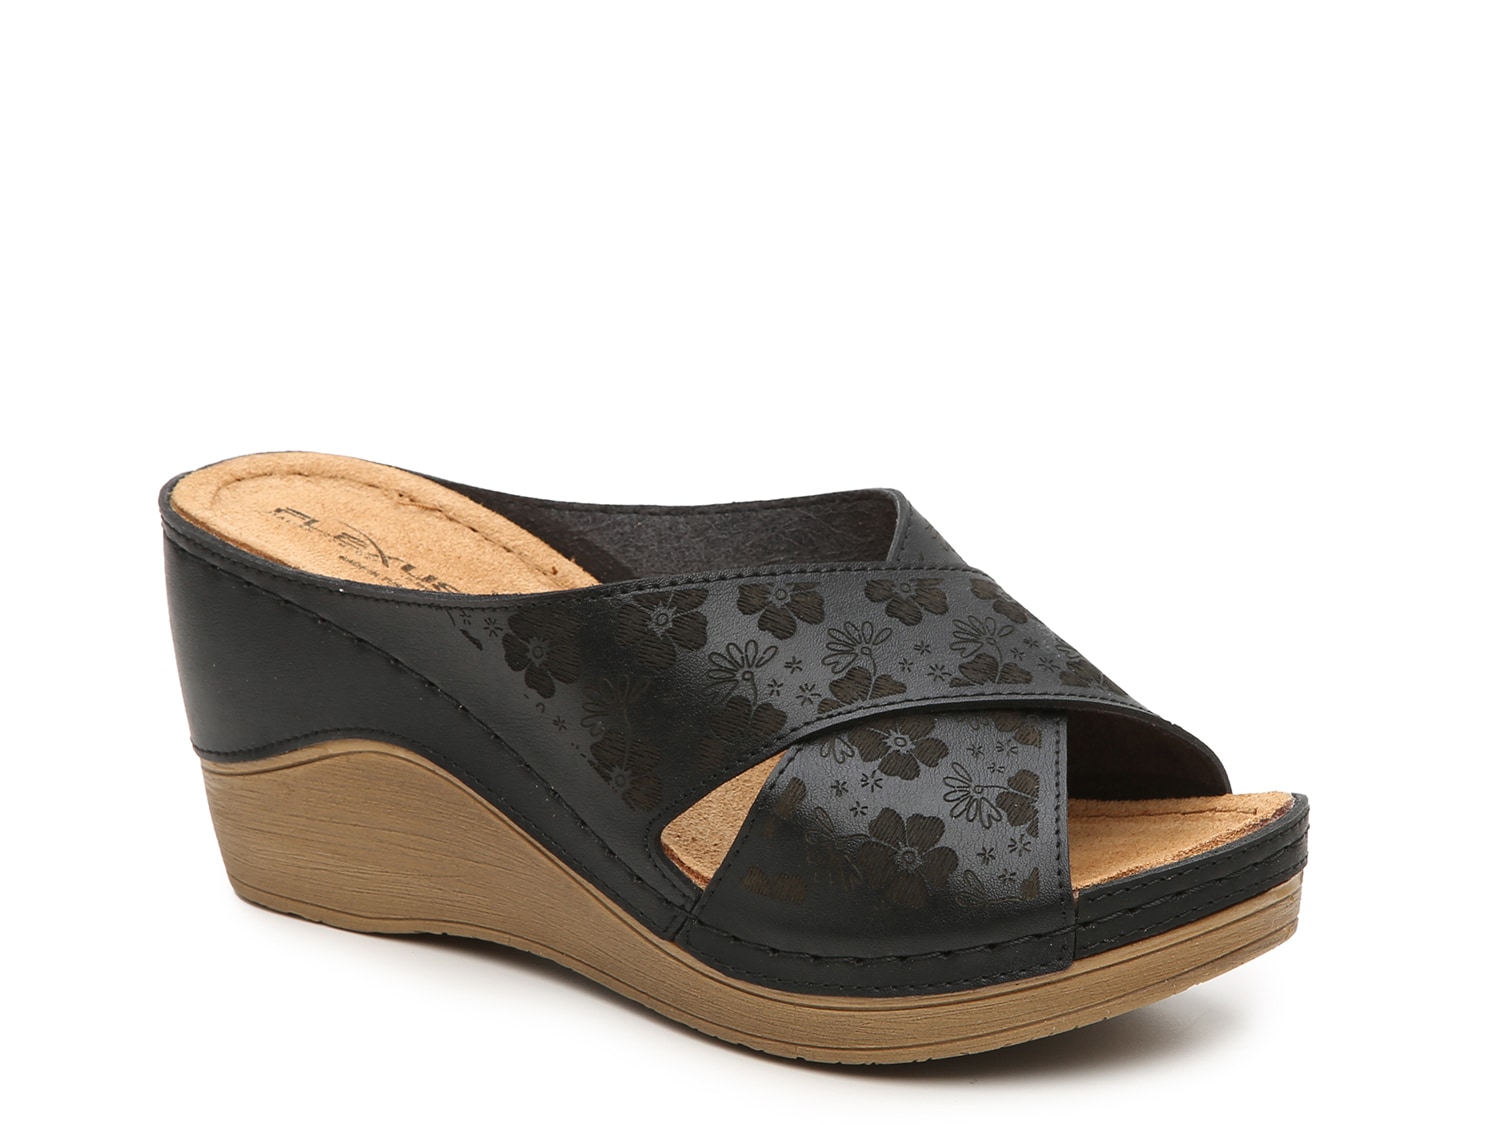 Flexus by Spring Step Remedios Wedge Sandal - Free Shipping | DSW